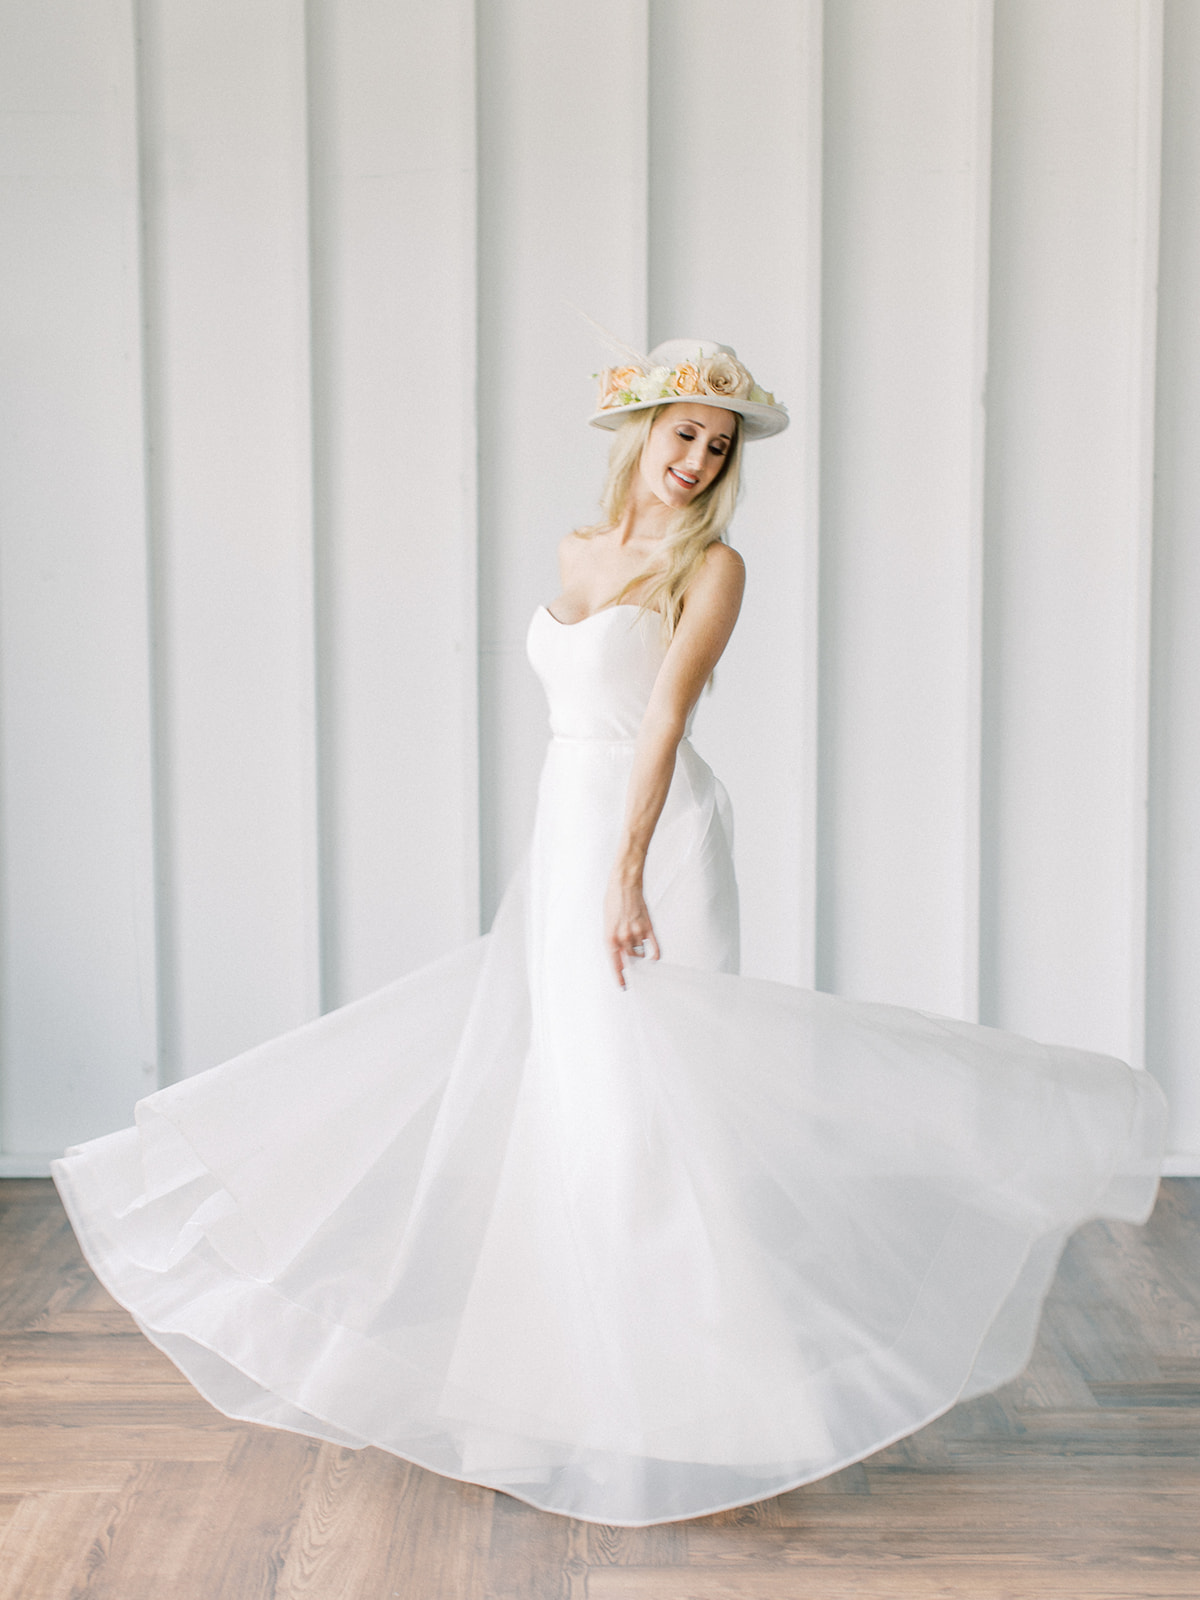 Sweetheart neckline wedding gown: Clean & Modern Styled Shoot at 14TENN featured on Nashville Bride Guide